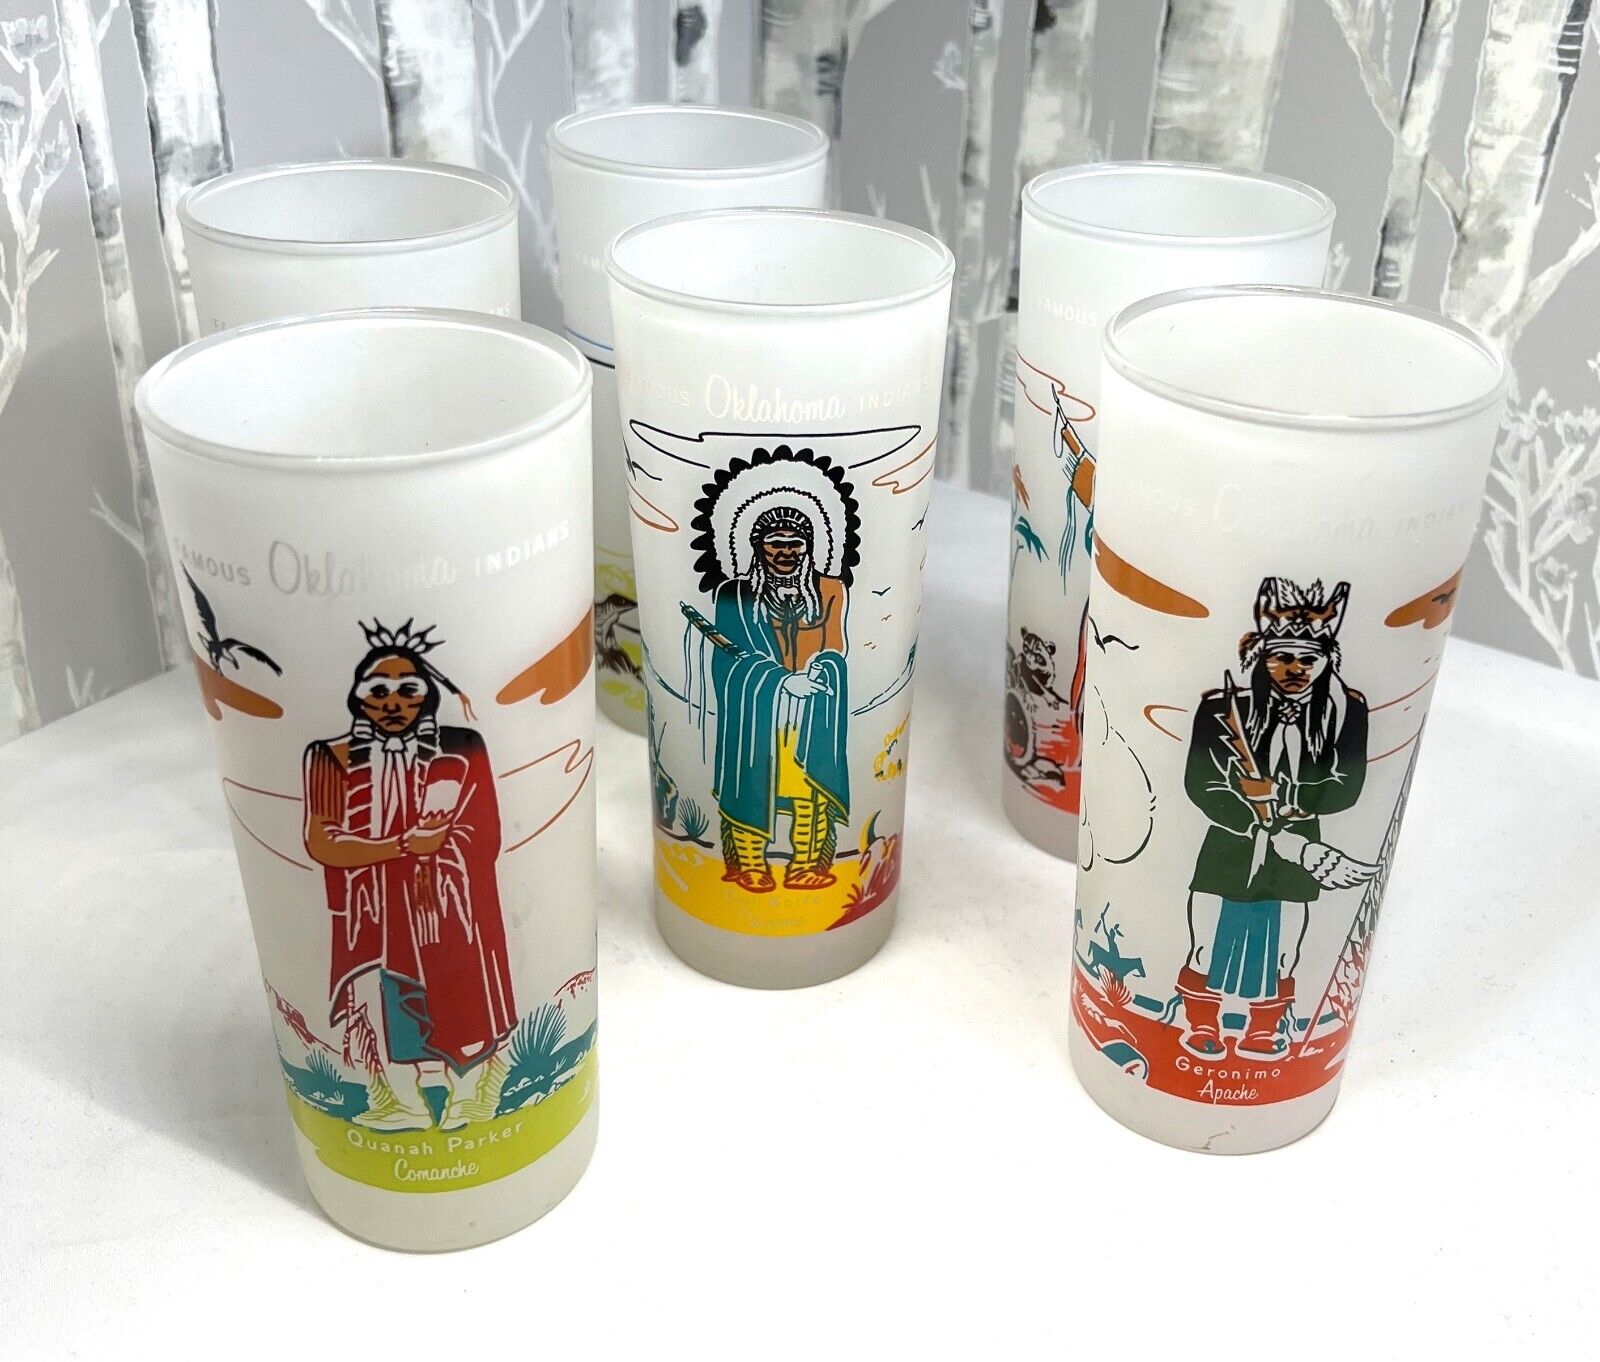 1959 Knox Oil Famous Oklahoma Indians Glasses by Acee Blue Eagle - Six glasses